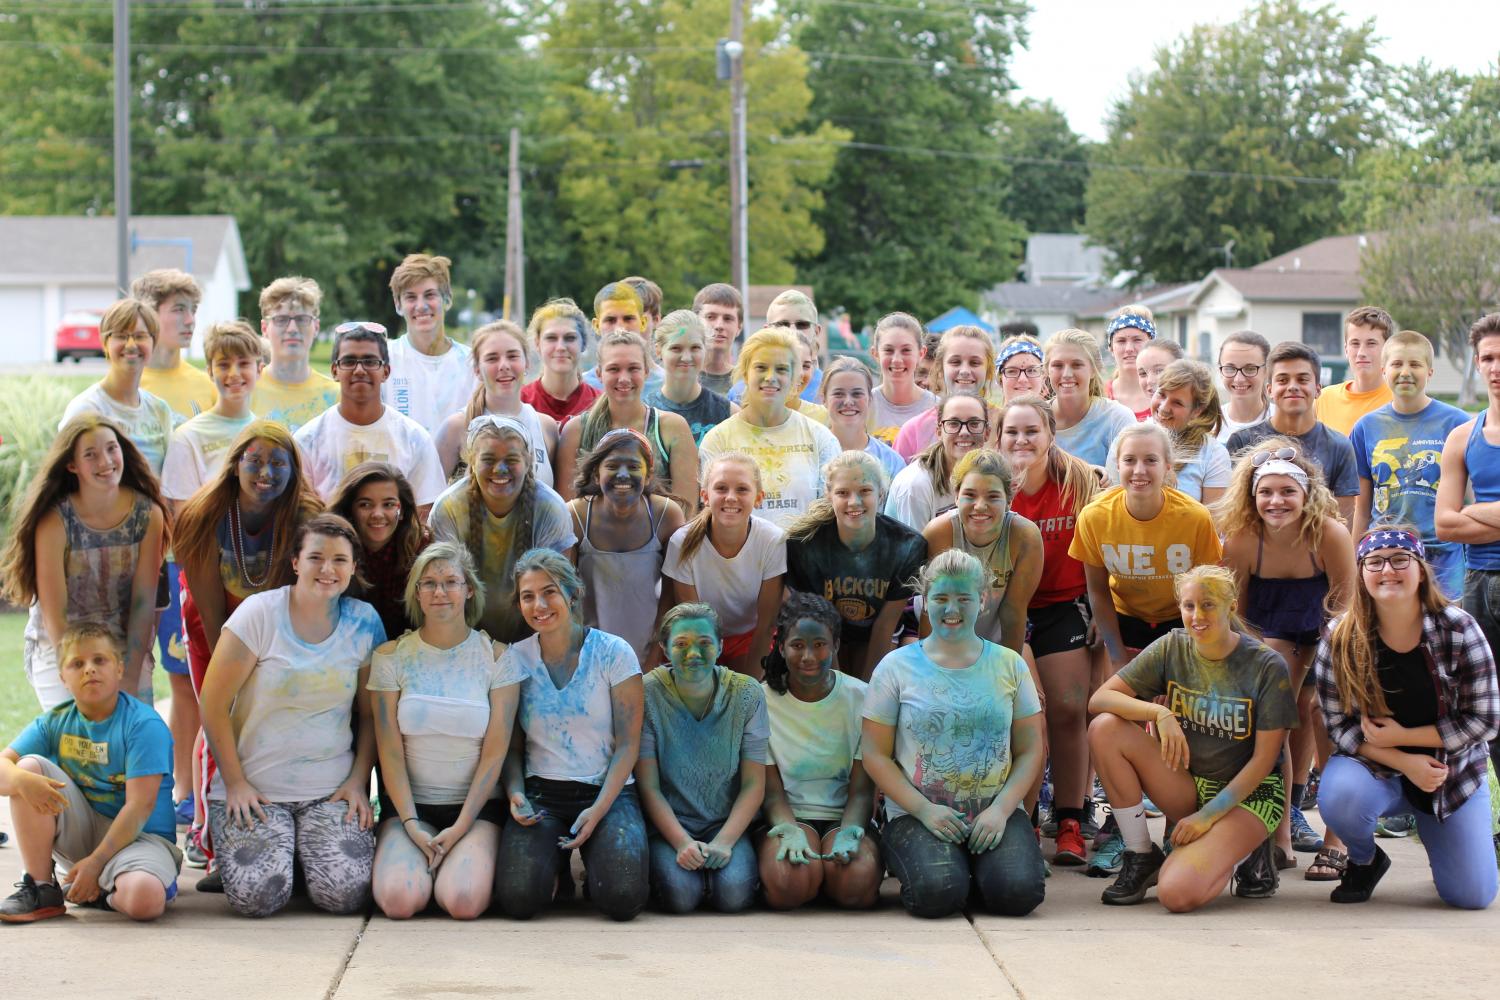 A group photo of students doused in color after participating in the race.